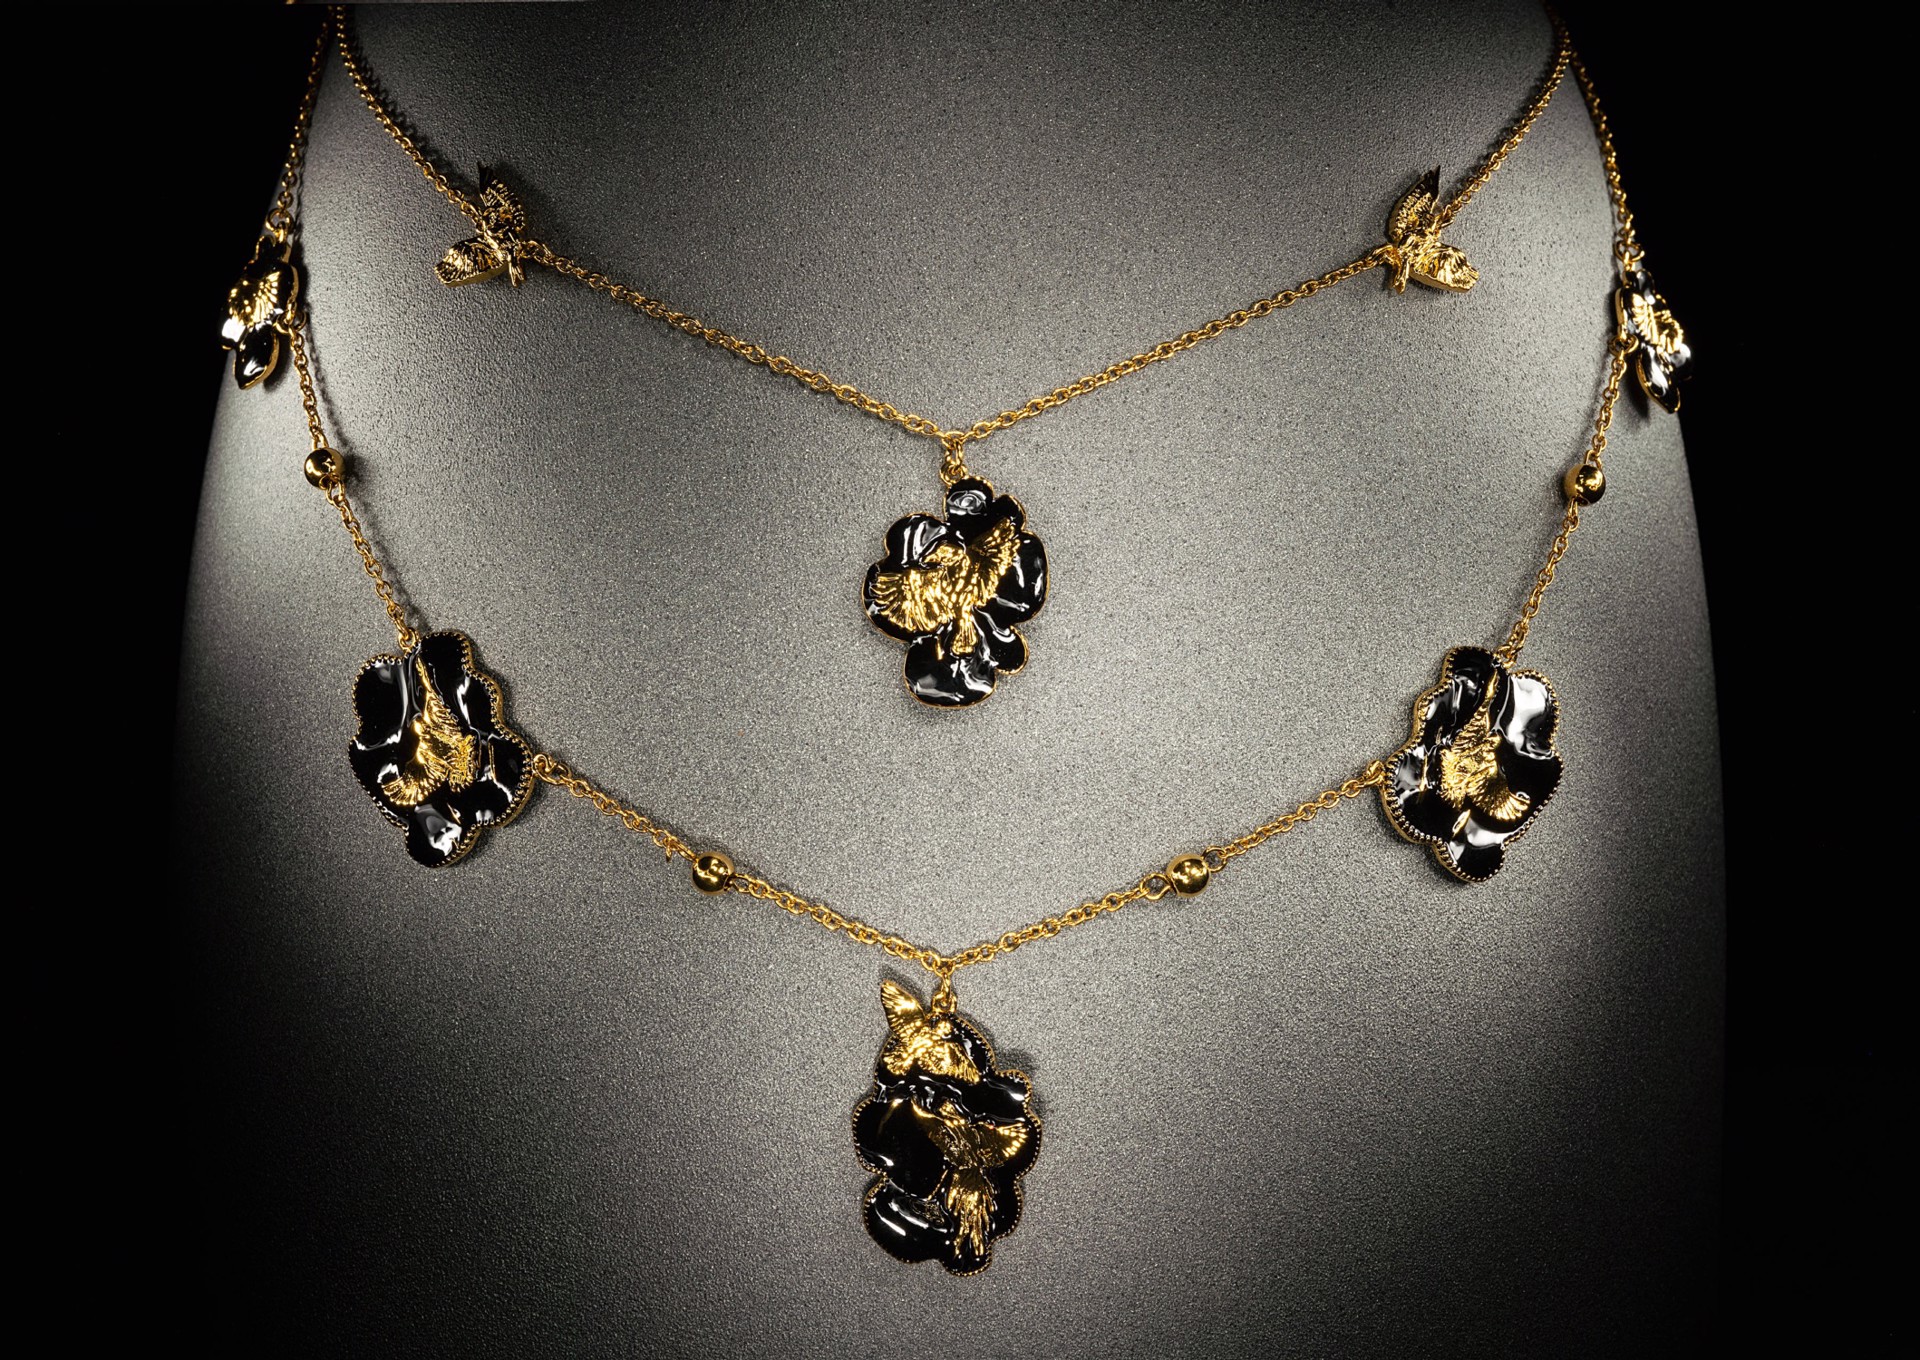 Arise Necklace - Gold and Black by Angela Mia